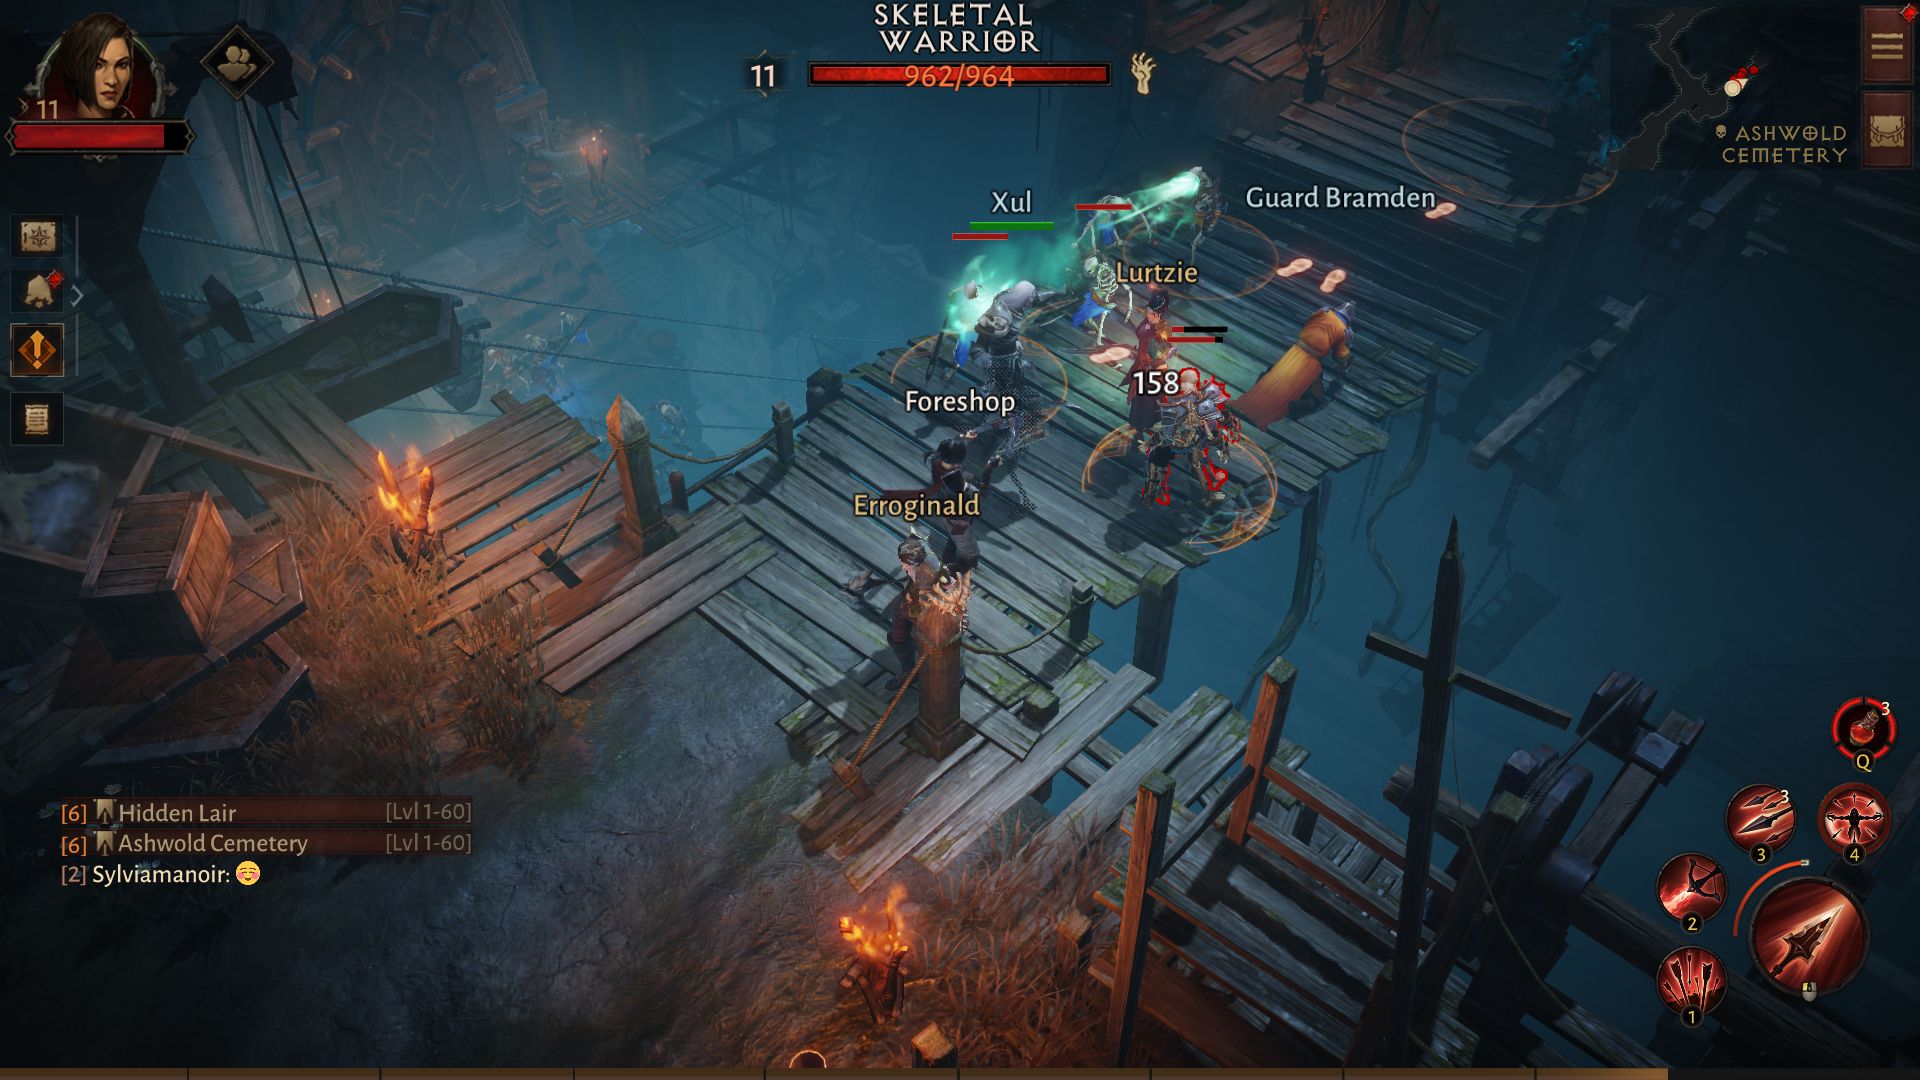 A group of player characters engaged in a fight with some skeletons on a bridge in Diablo Immortal